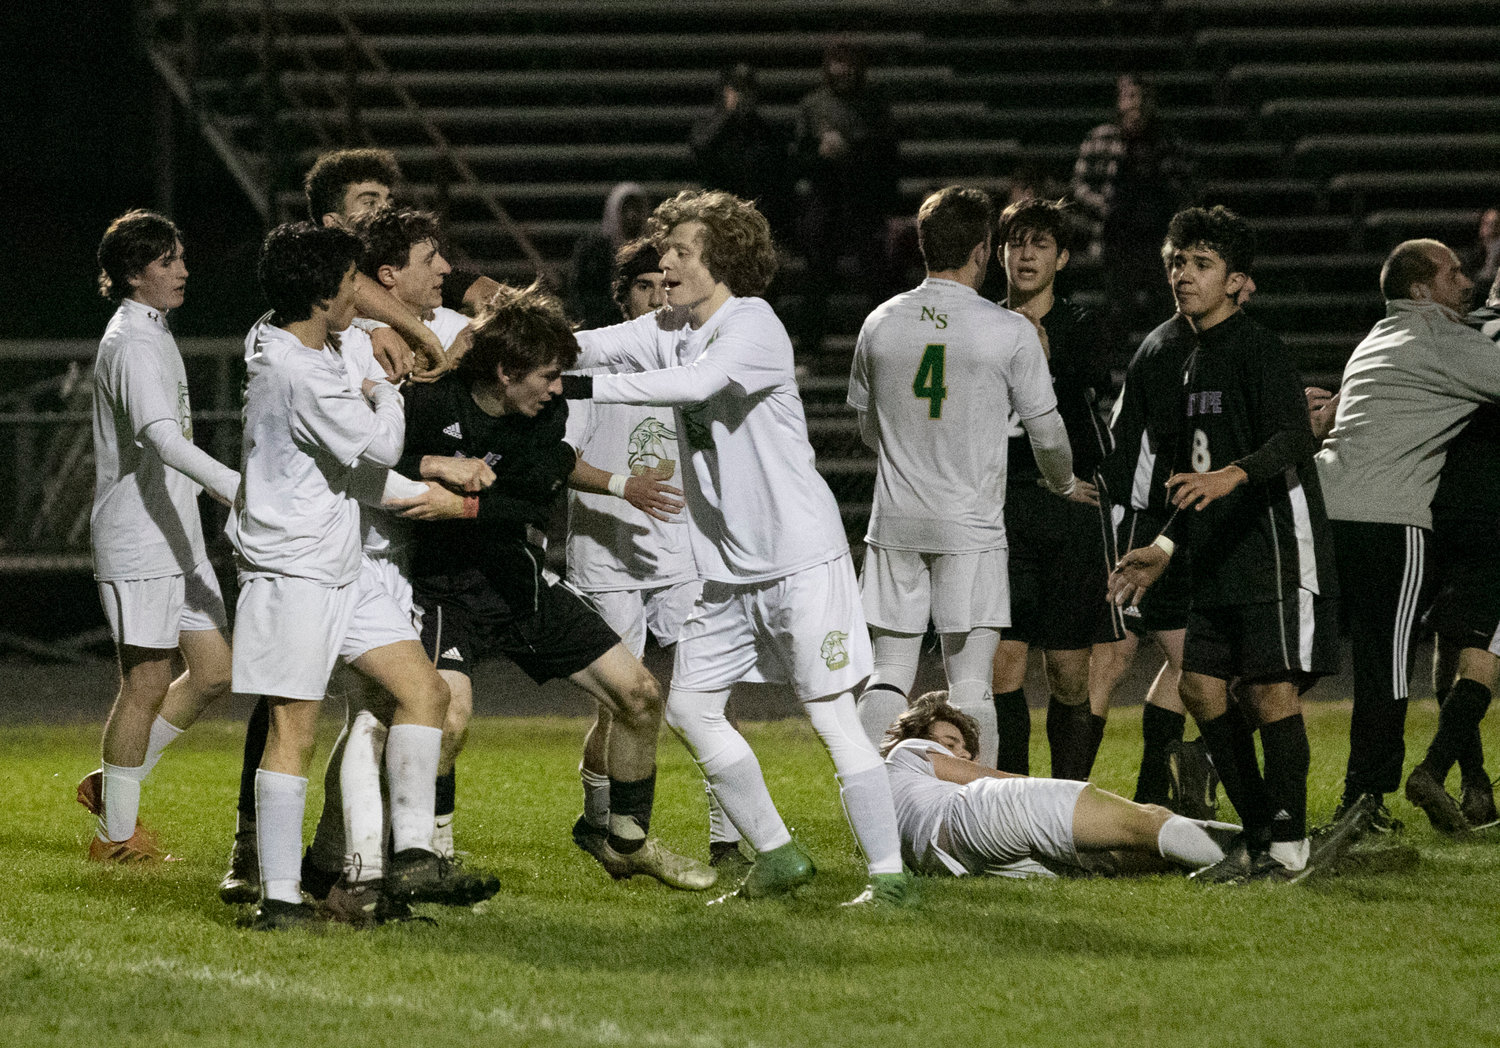 A group of Northmen contain Huskies senior Dylan Brol during a melee late in the game. Brol was tripped in the box and fell flat on his face. The defender also fell and rolled over the top of the senior. Infuriated, Brol came up swinging and a melee ensued.